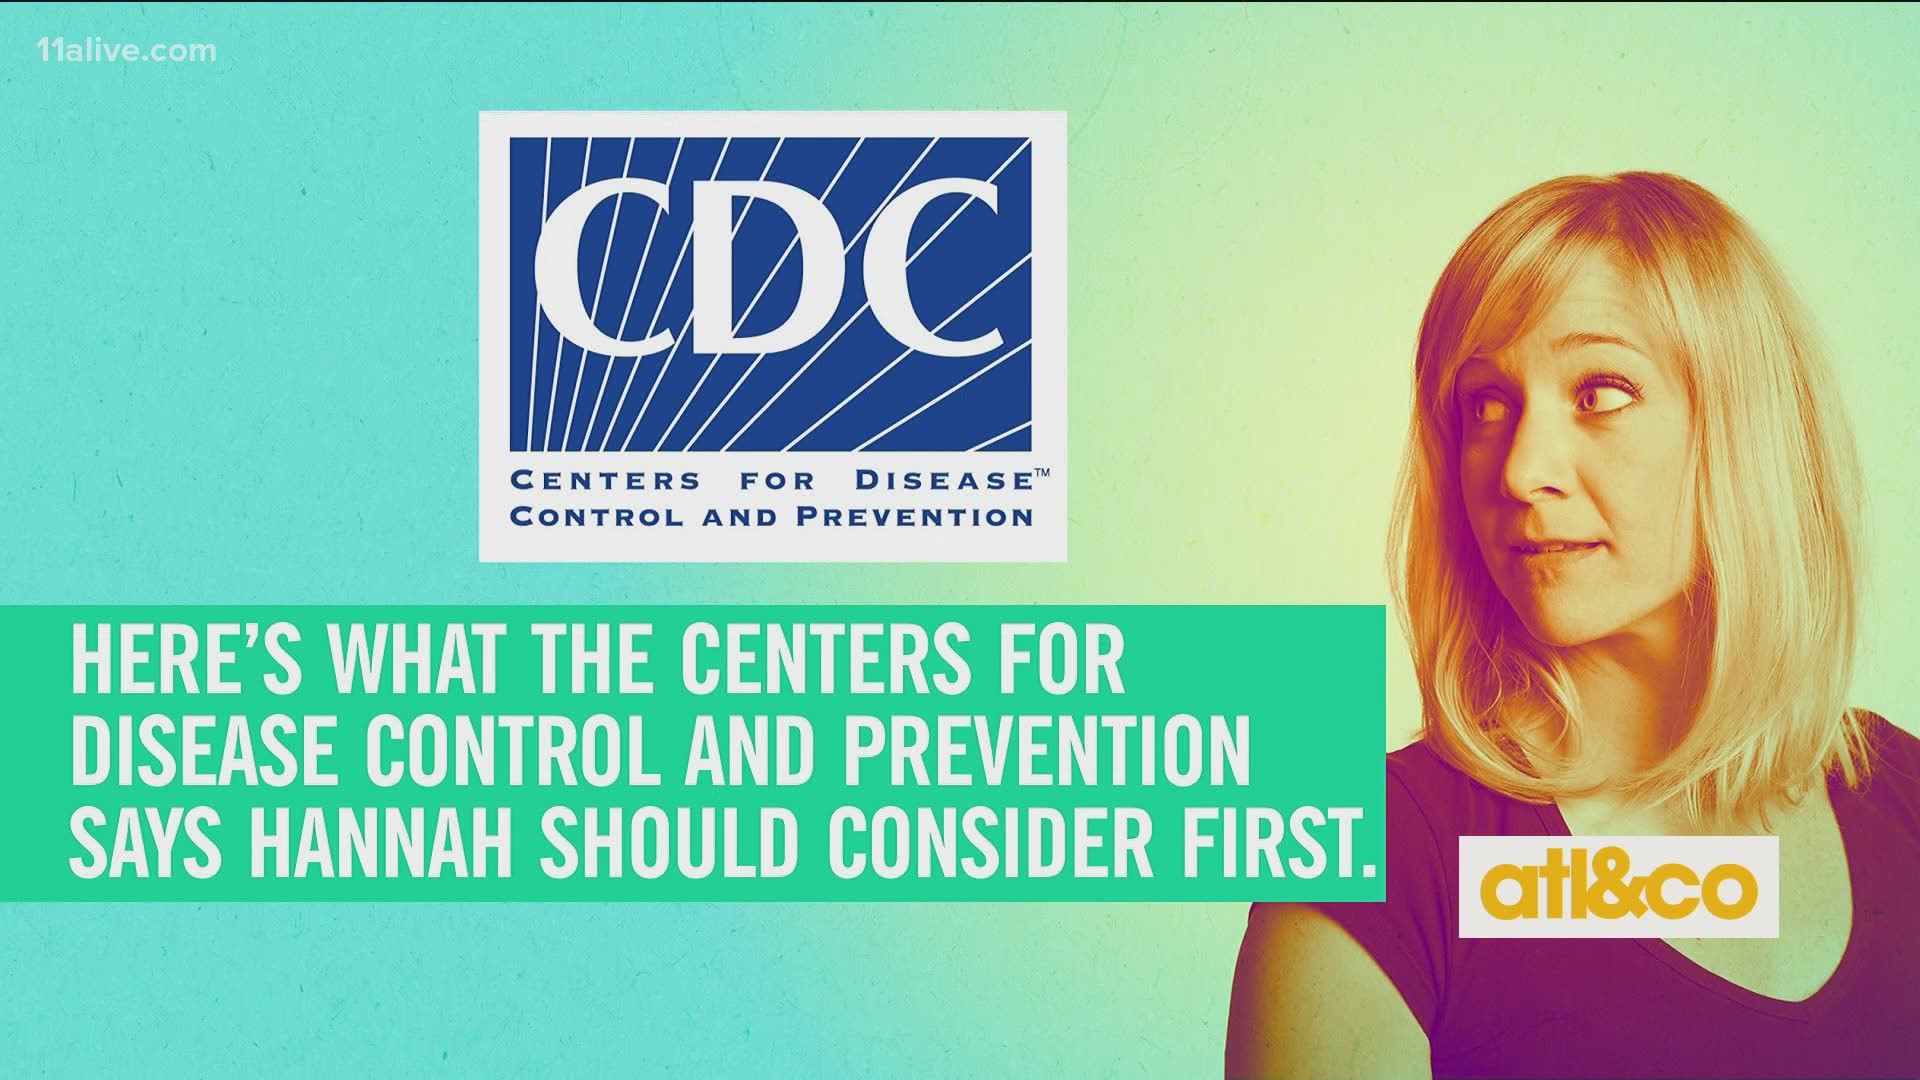 Ask yourself these questions from the CDC before gathering outside this holiday weekend.